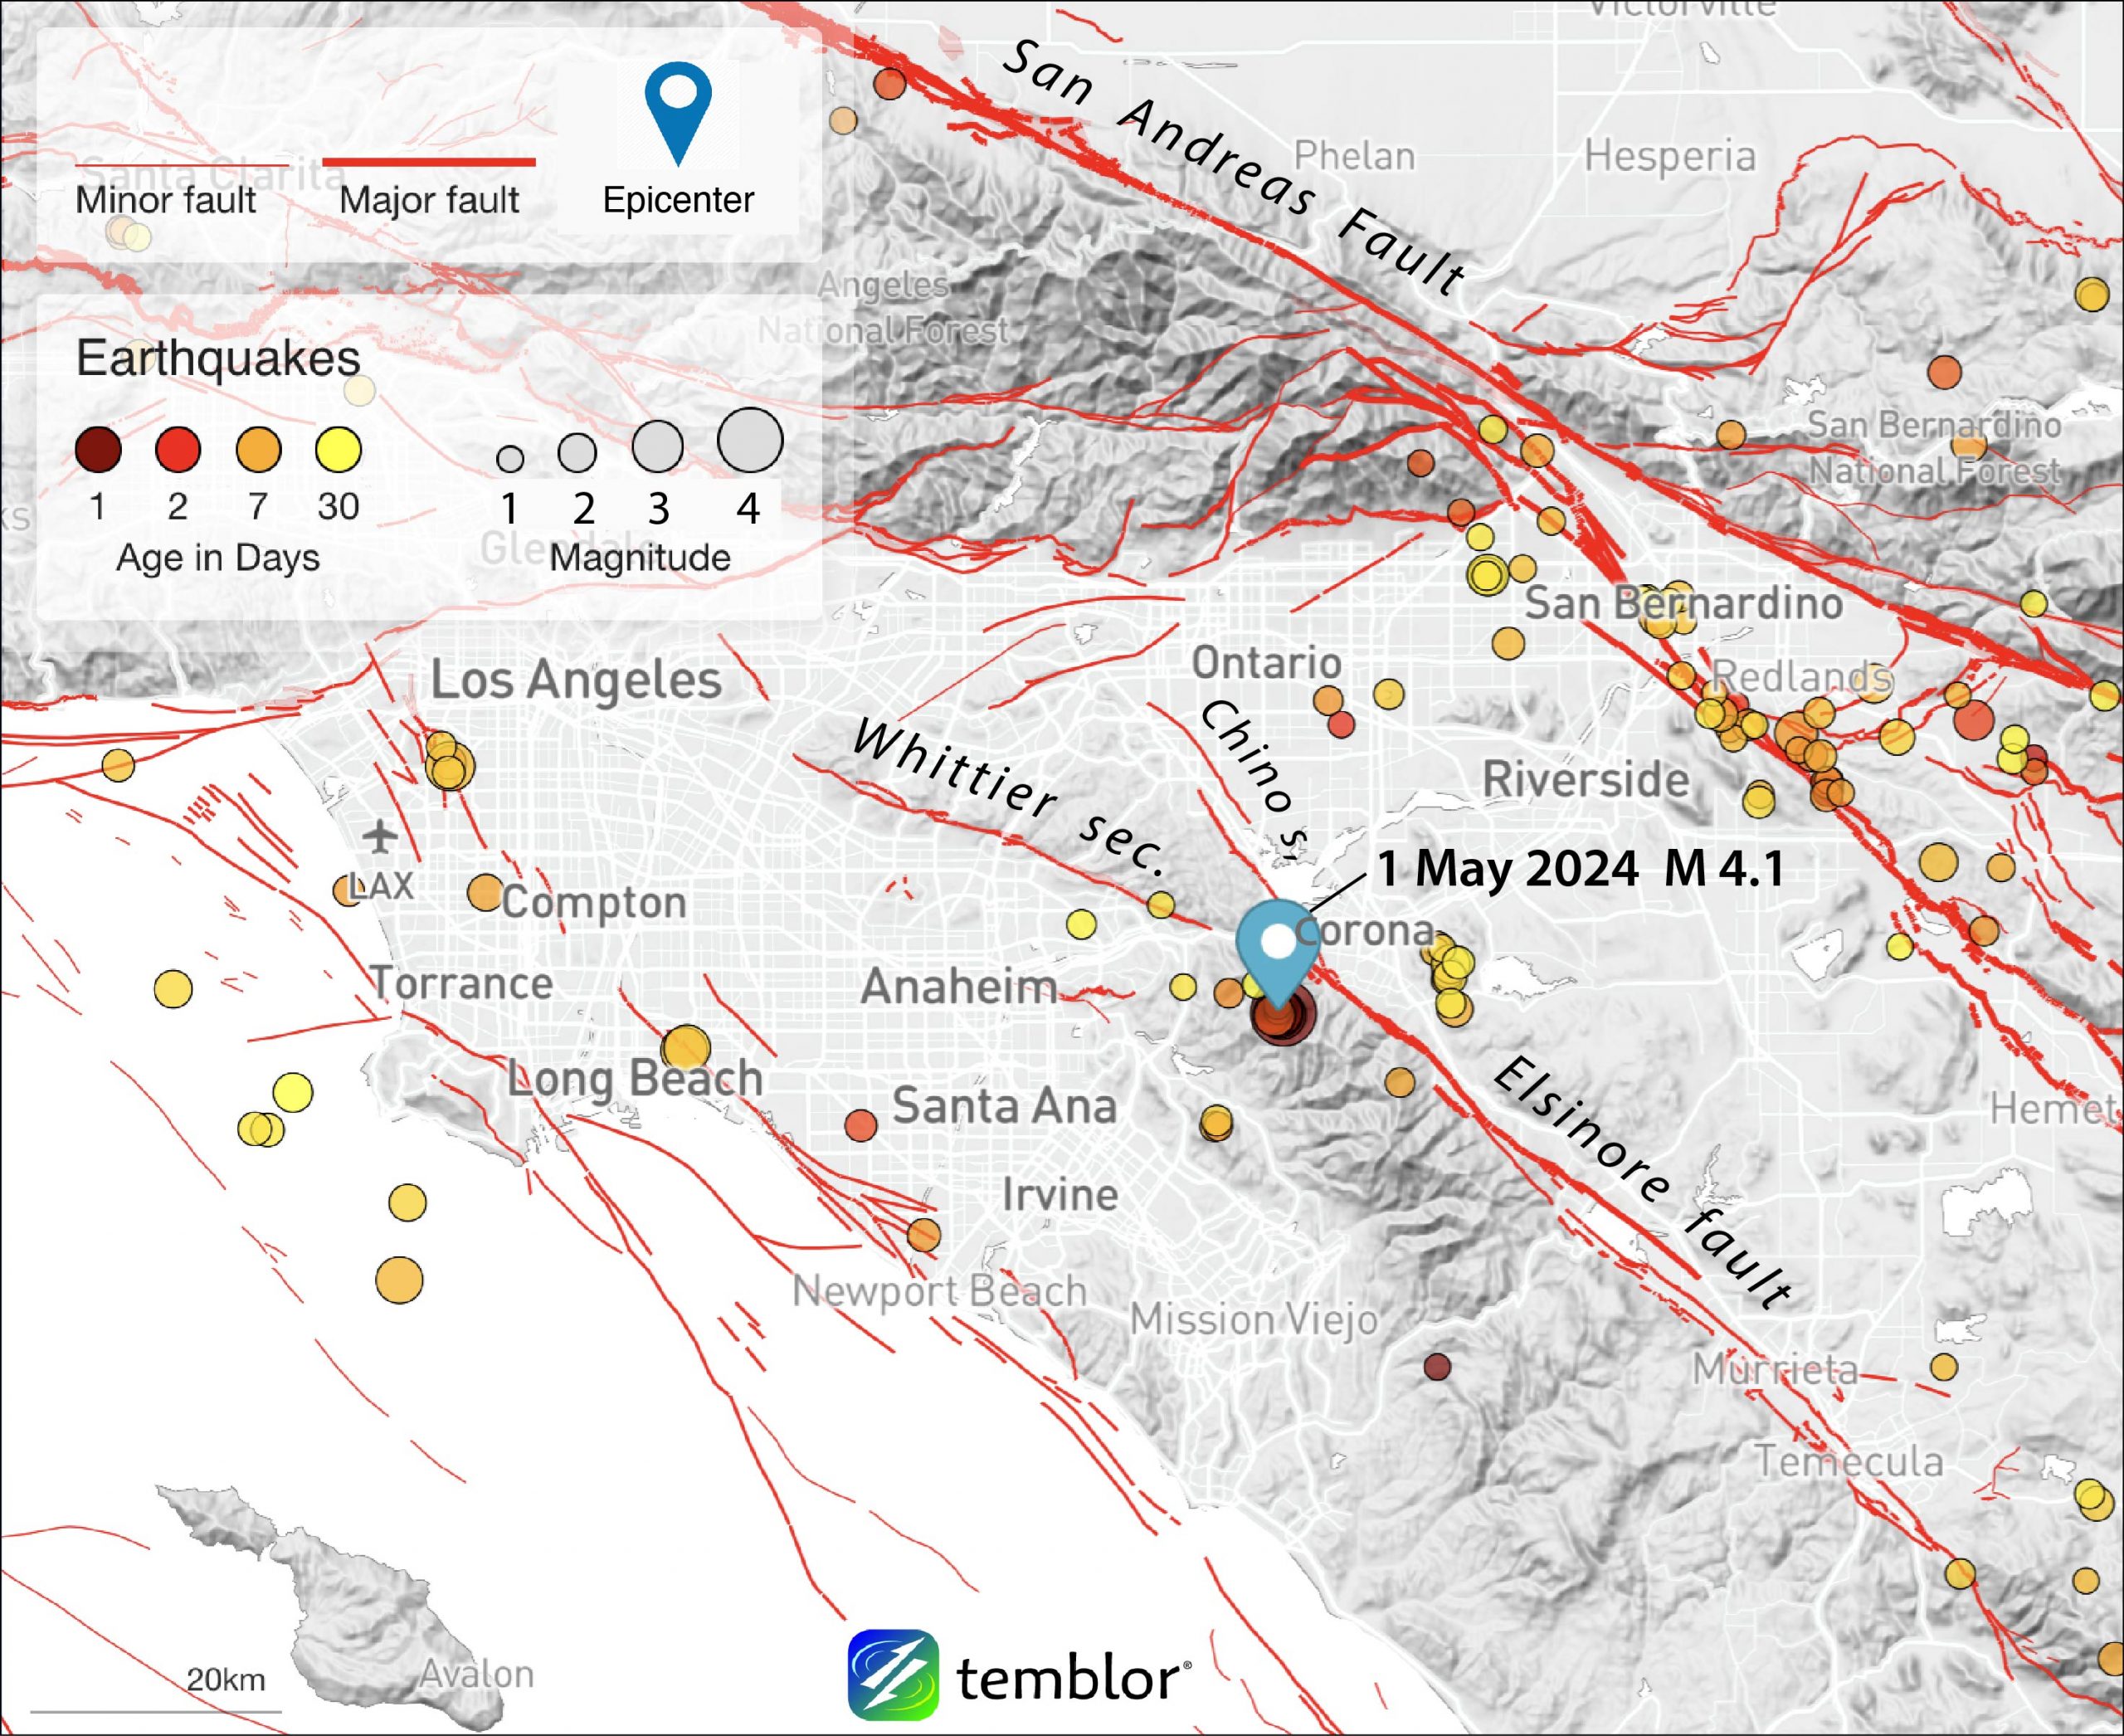 Figure 1. Map showing the past 30 days of earthquakes in the region, as well as Wednesday's mainshock. Credit: Temblor, CC BY-NC-ND 4.0